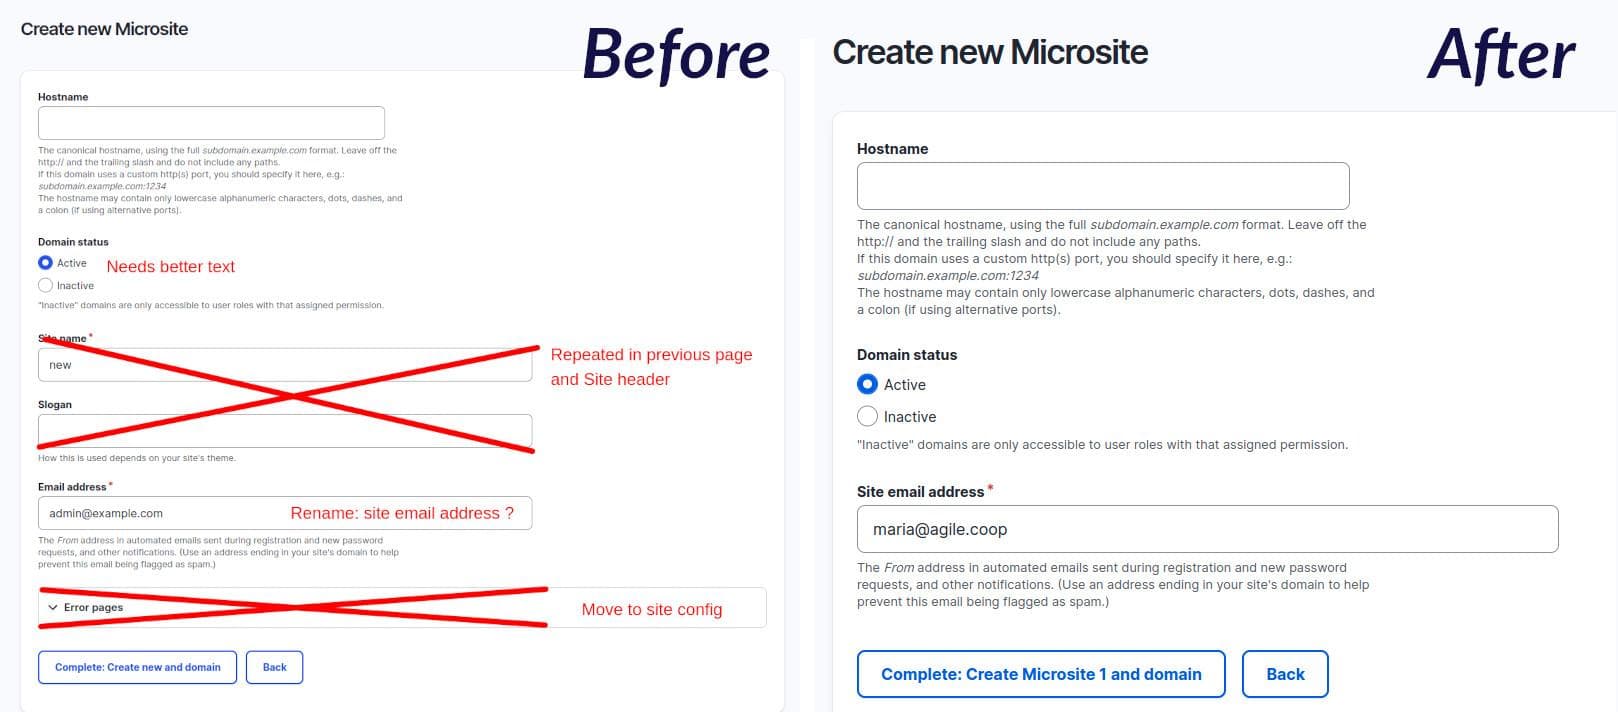 Before and after screenshots of the Create new Microsite. The before shot shows fields striked out in red, the after shot shows the admin screen without these fields.